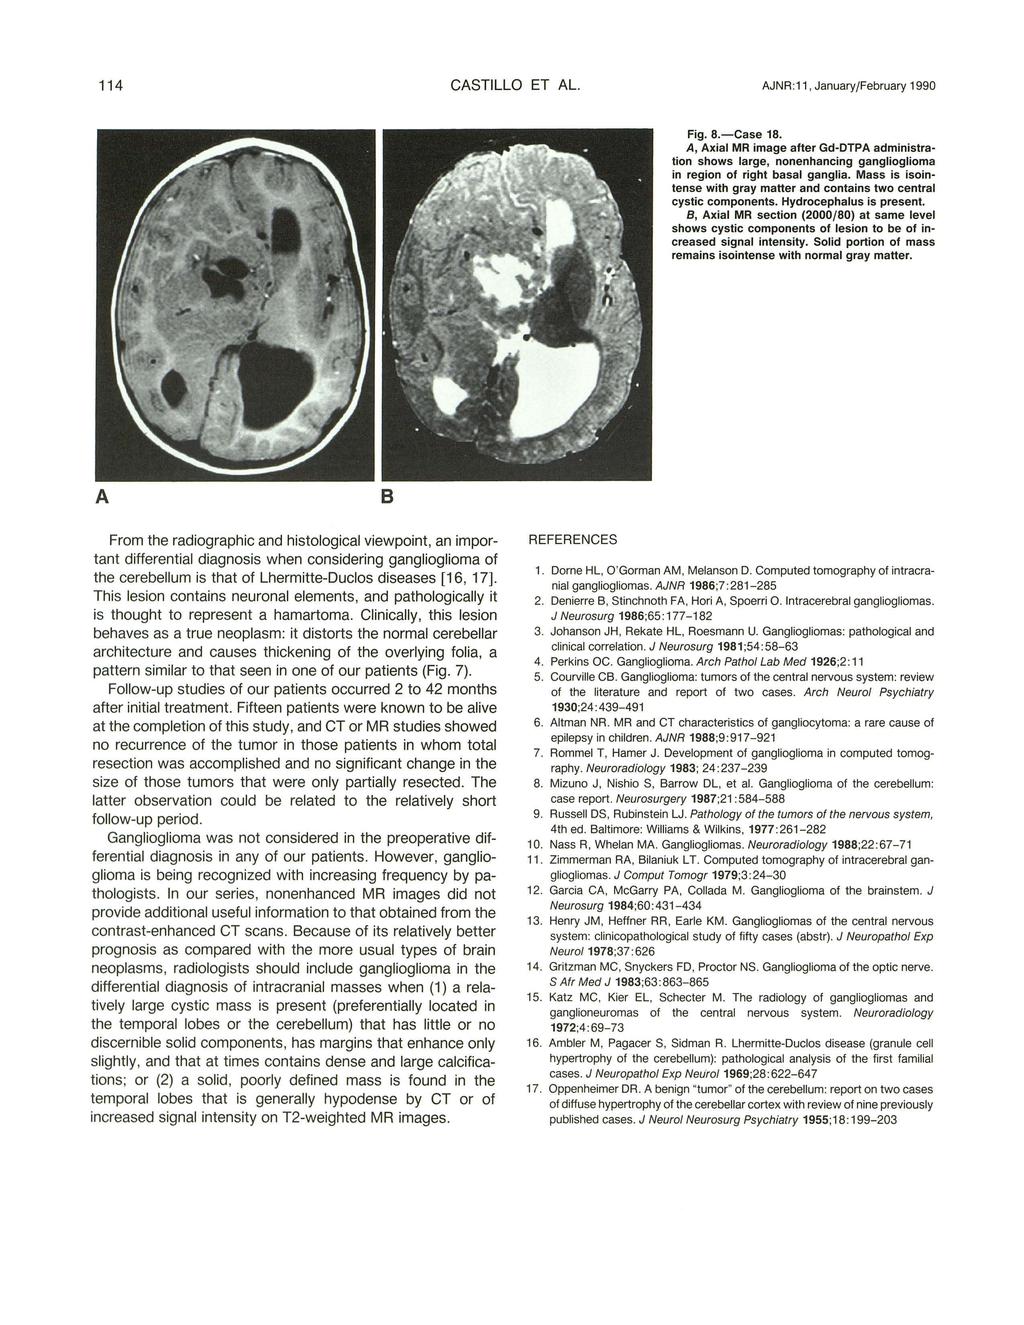 114 CSTILLO ET L. JNR:11, January/February 1990 Fig. 8.-Case 18., xial MR image after Gd-DTP administration shows large, nonenhancing ganglioglioma in region of right basal ganglia.